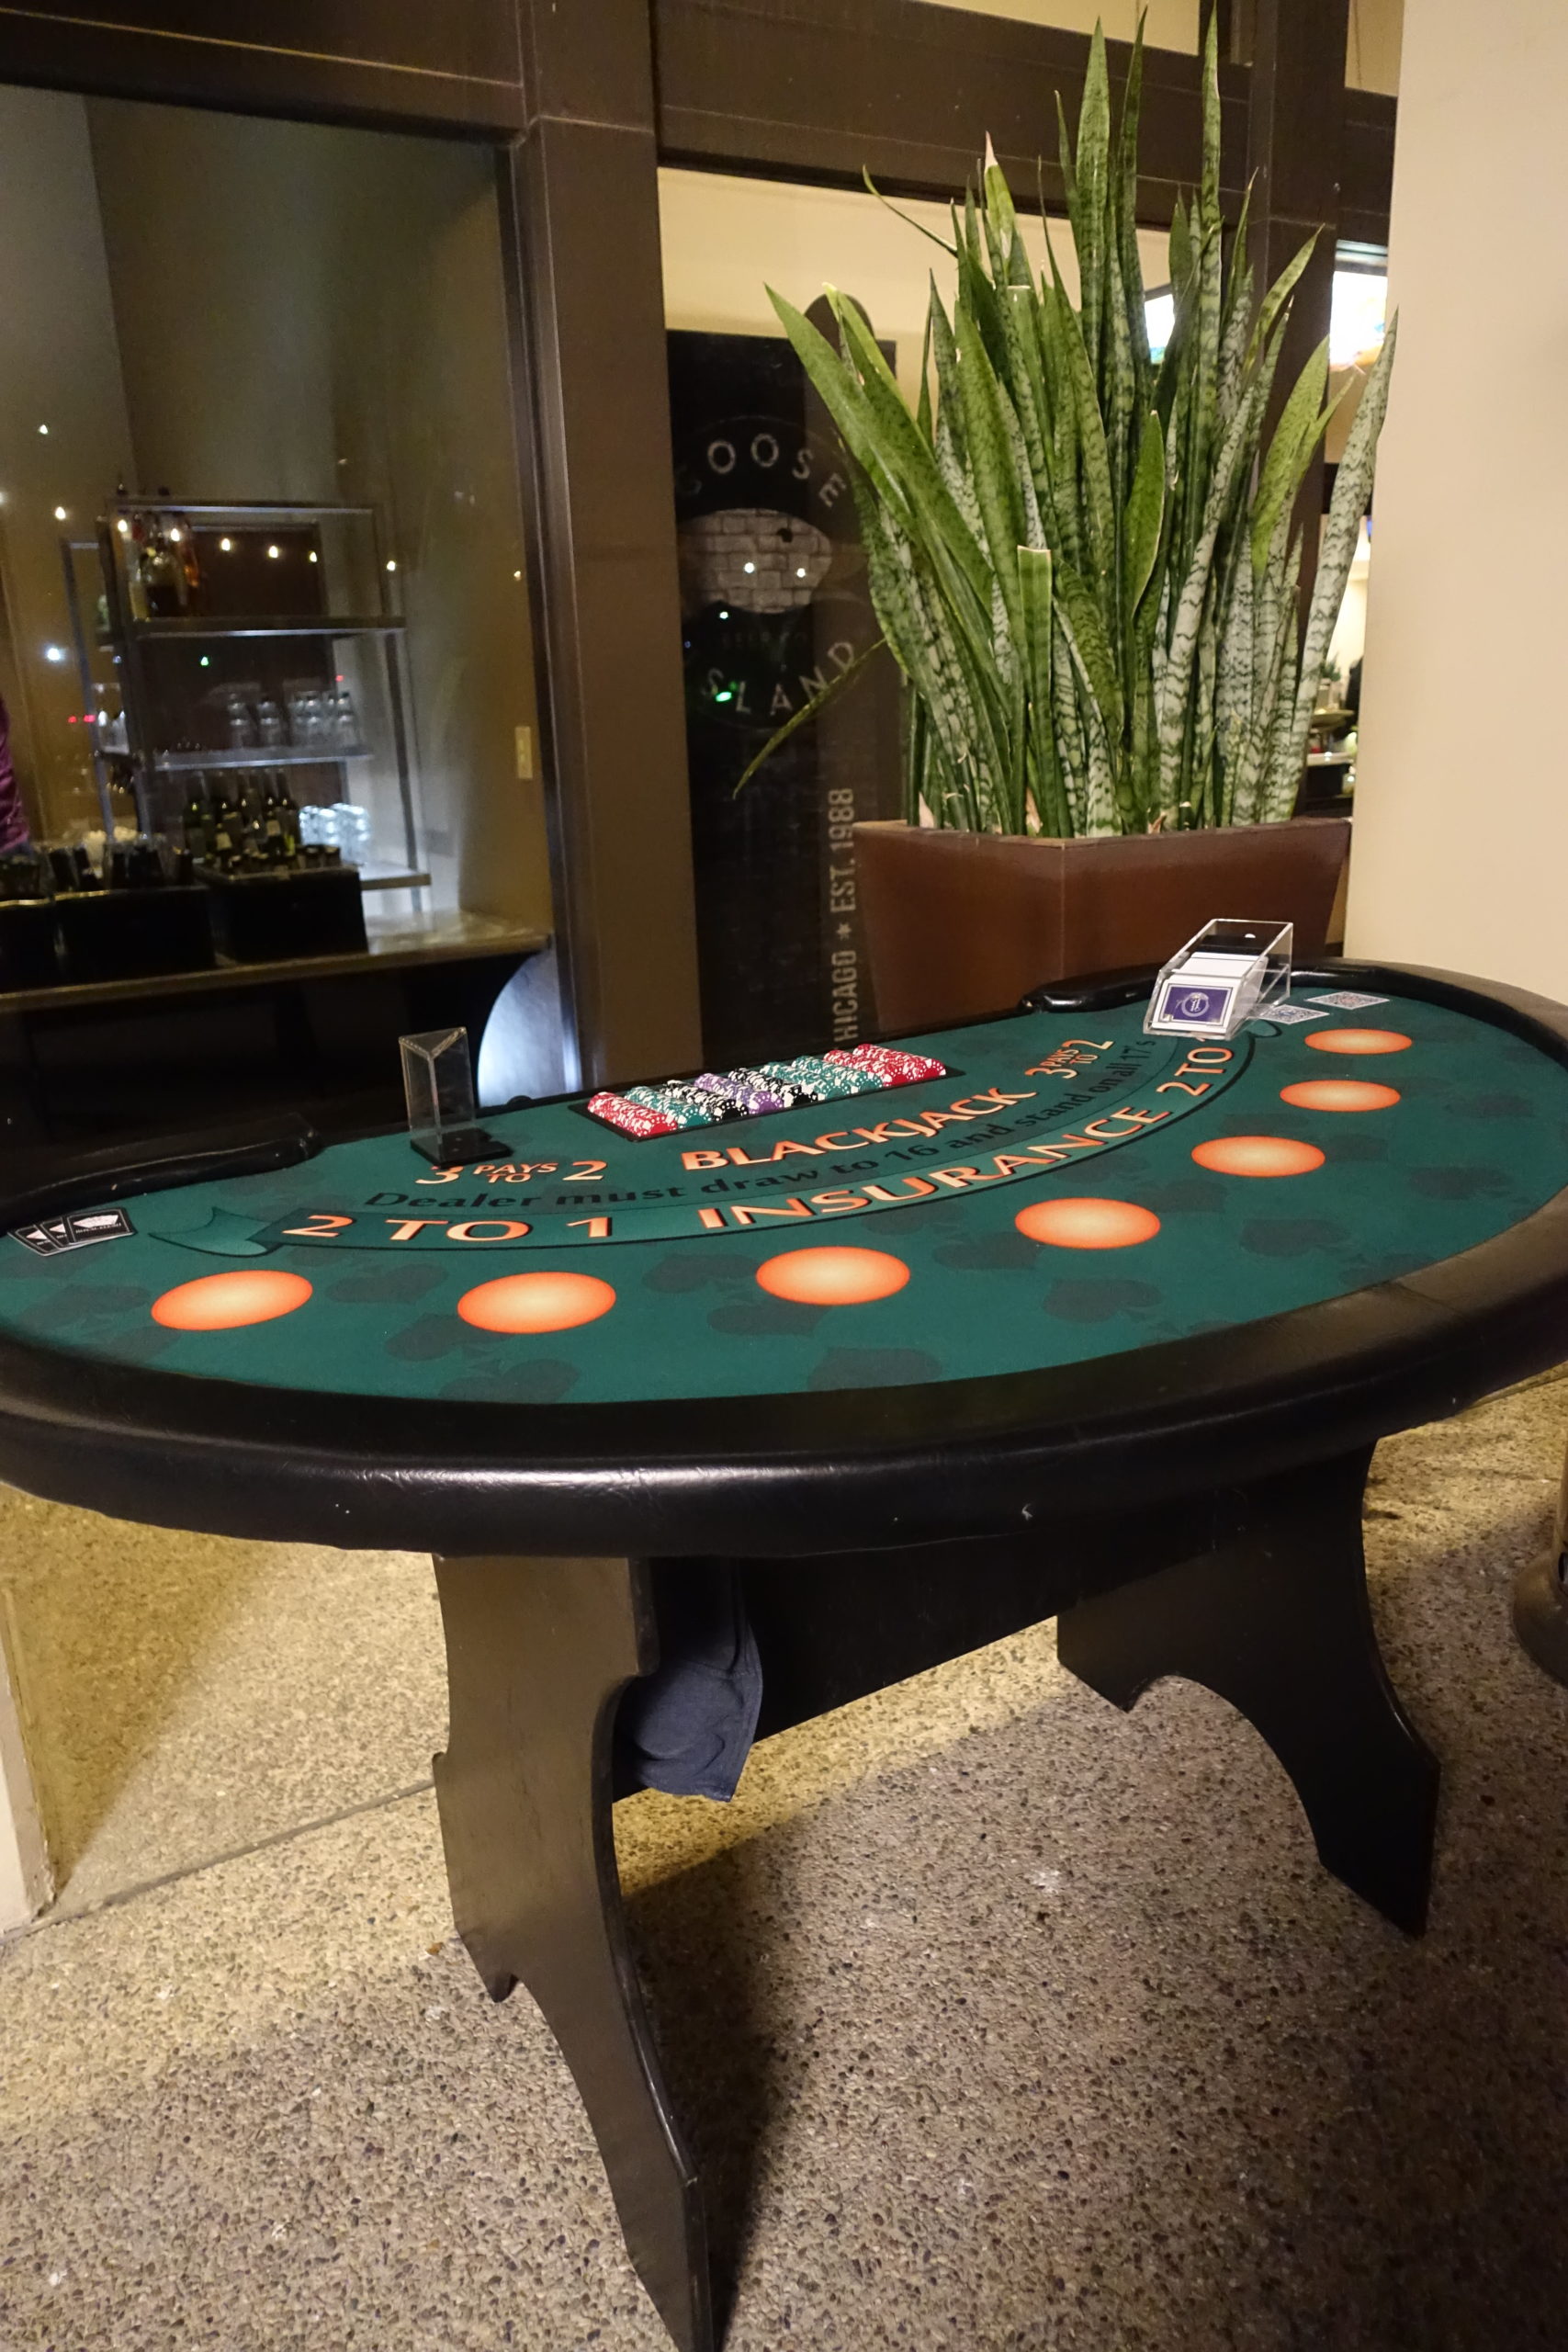 A Blackjack Table At A Casino-themed Event